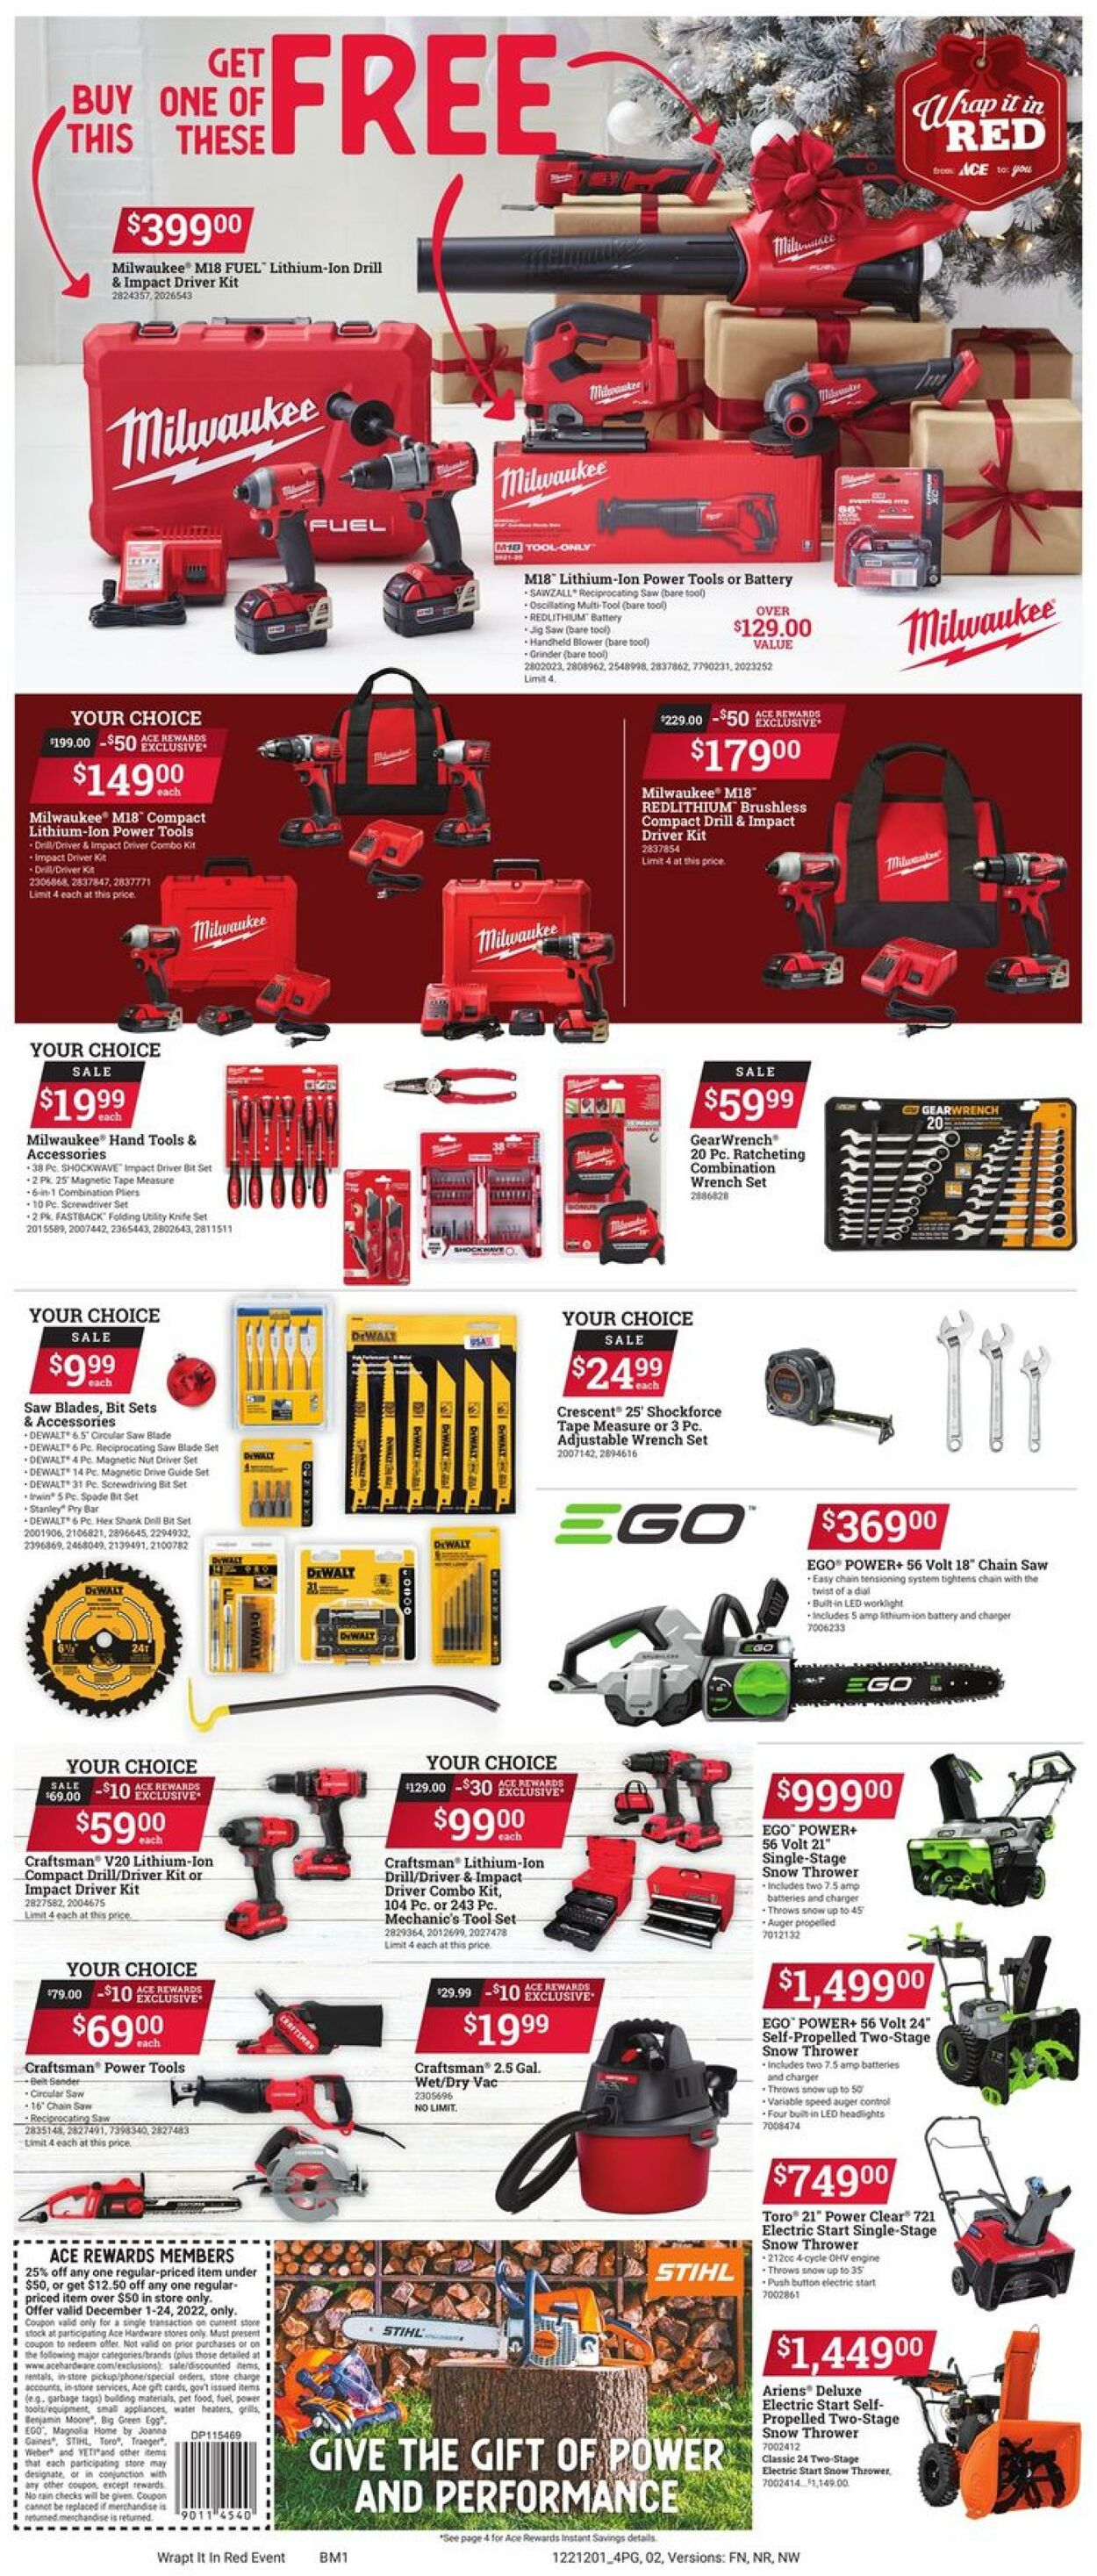 Weekly ad Ace Hardware 12/01/2022 - 12/24/2022